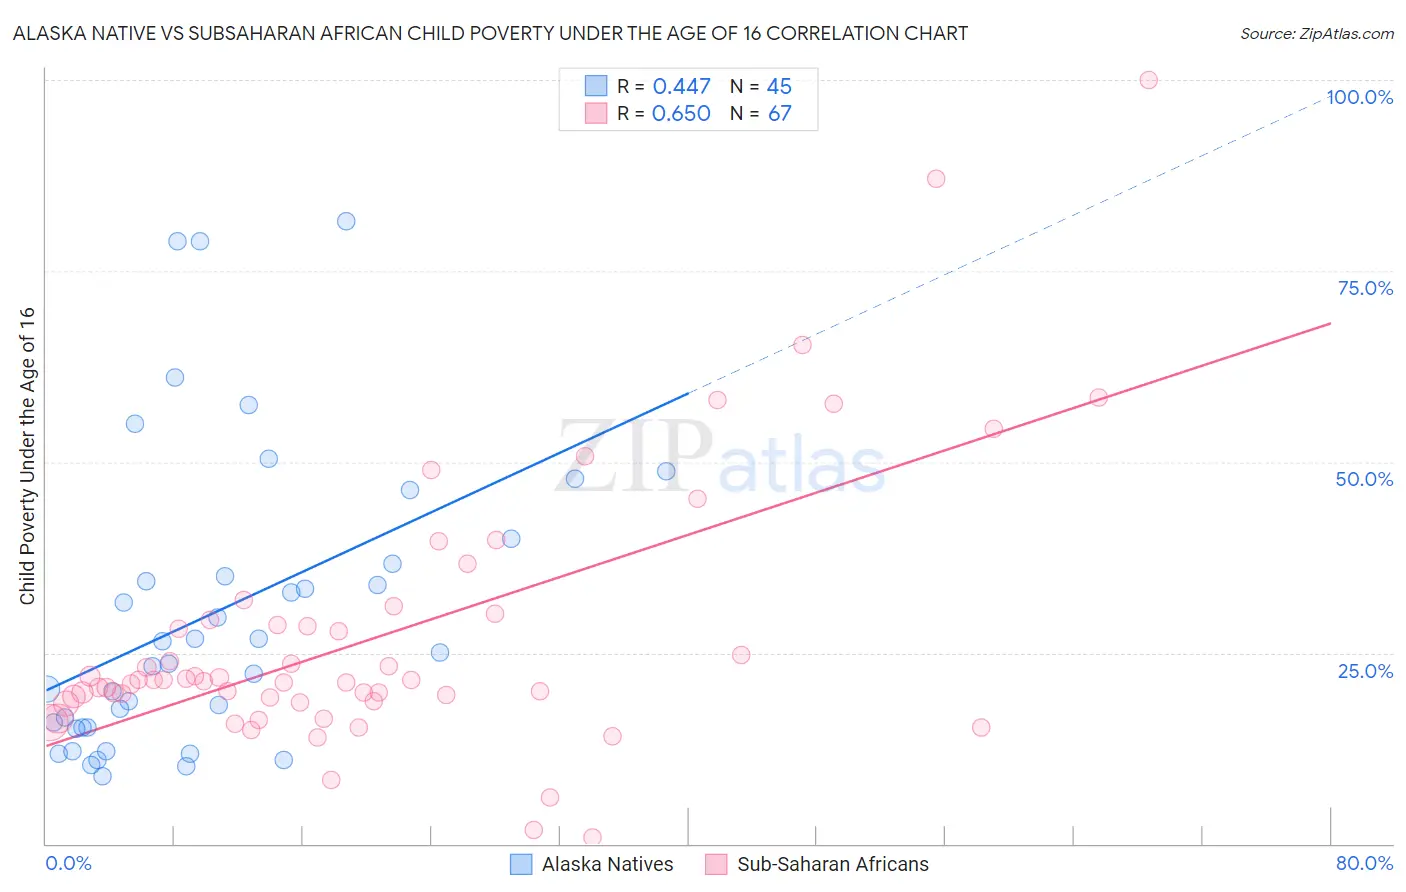 Alaska Native vs Subsaharan African Child Poverty Under the Age of 16